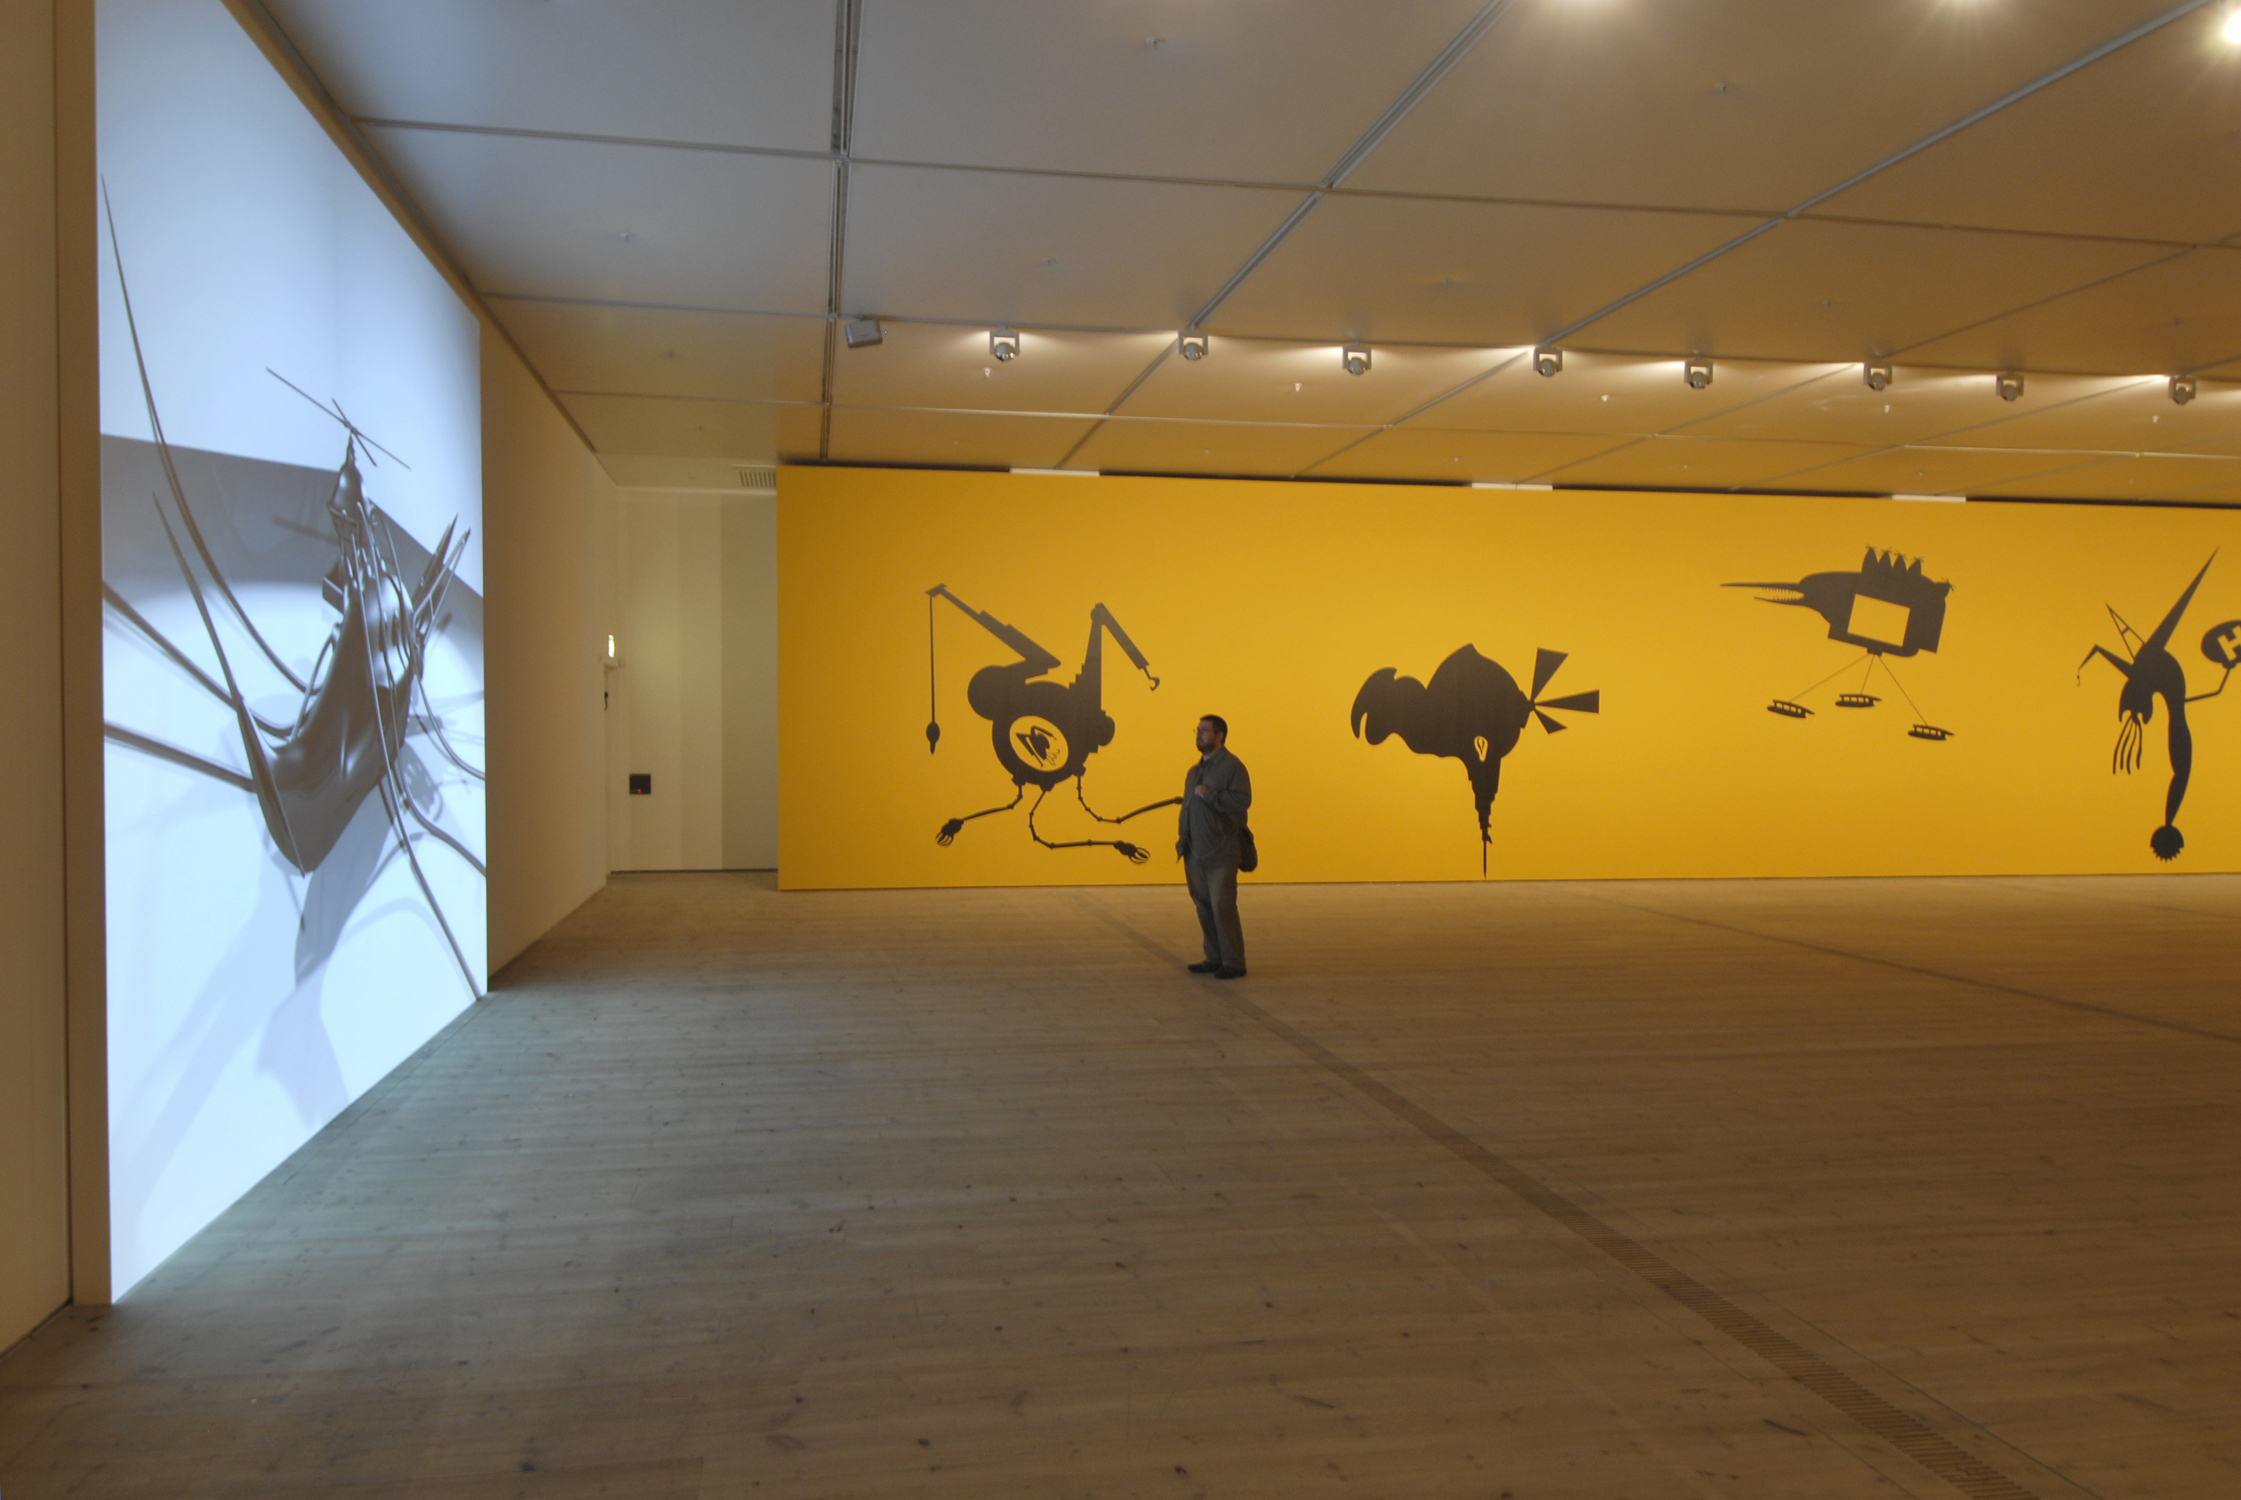   The
Bride Stripped Bare by Her Energy's' Evil, 2006, two large scale wall paintings
(10 m each + acrylic colors), audio elements and a projected short 3D animated
film, &nbsp;2 min. 44 sec. Installation view
at BALTIC Centre for Contemporary Art, G